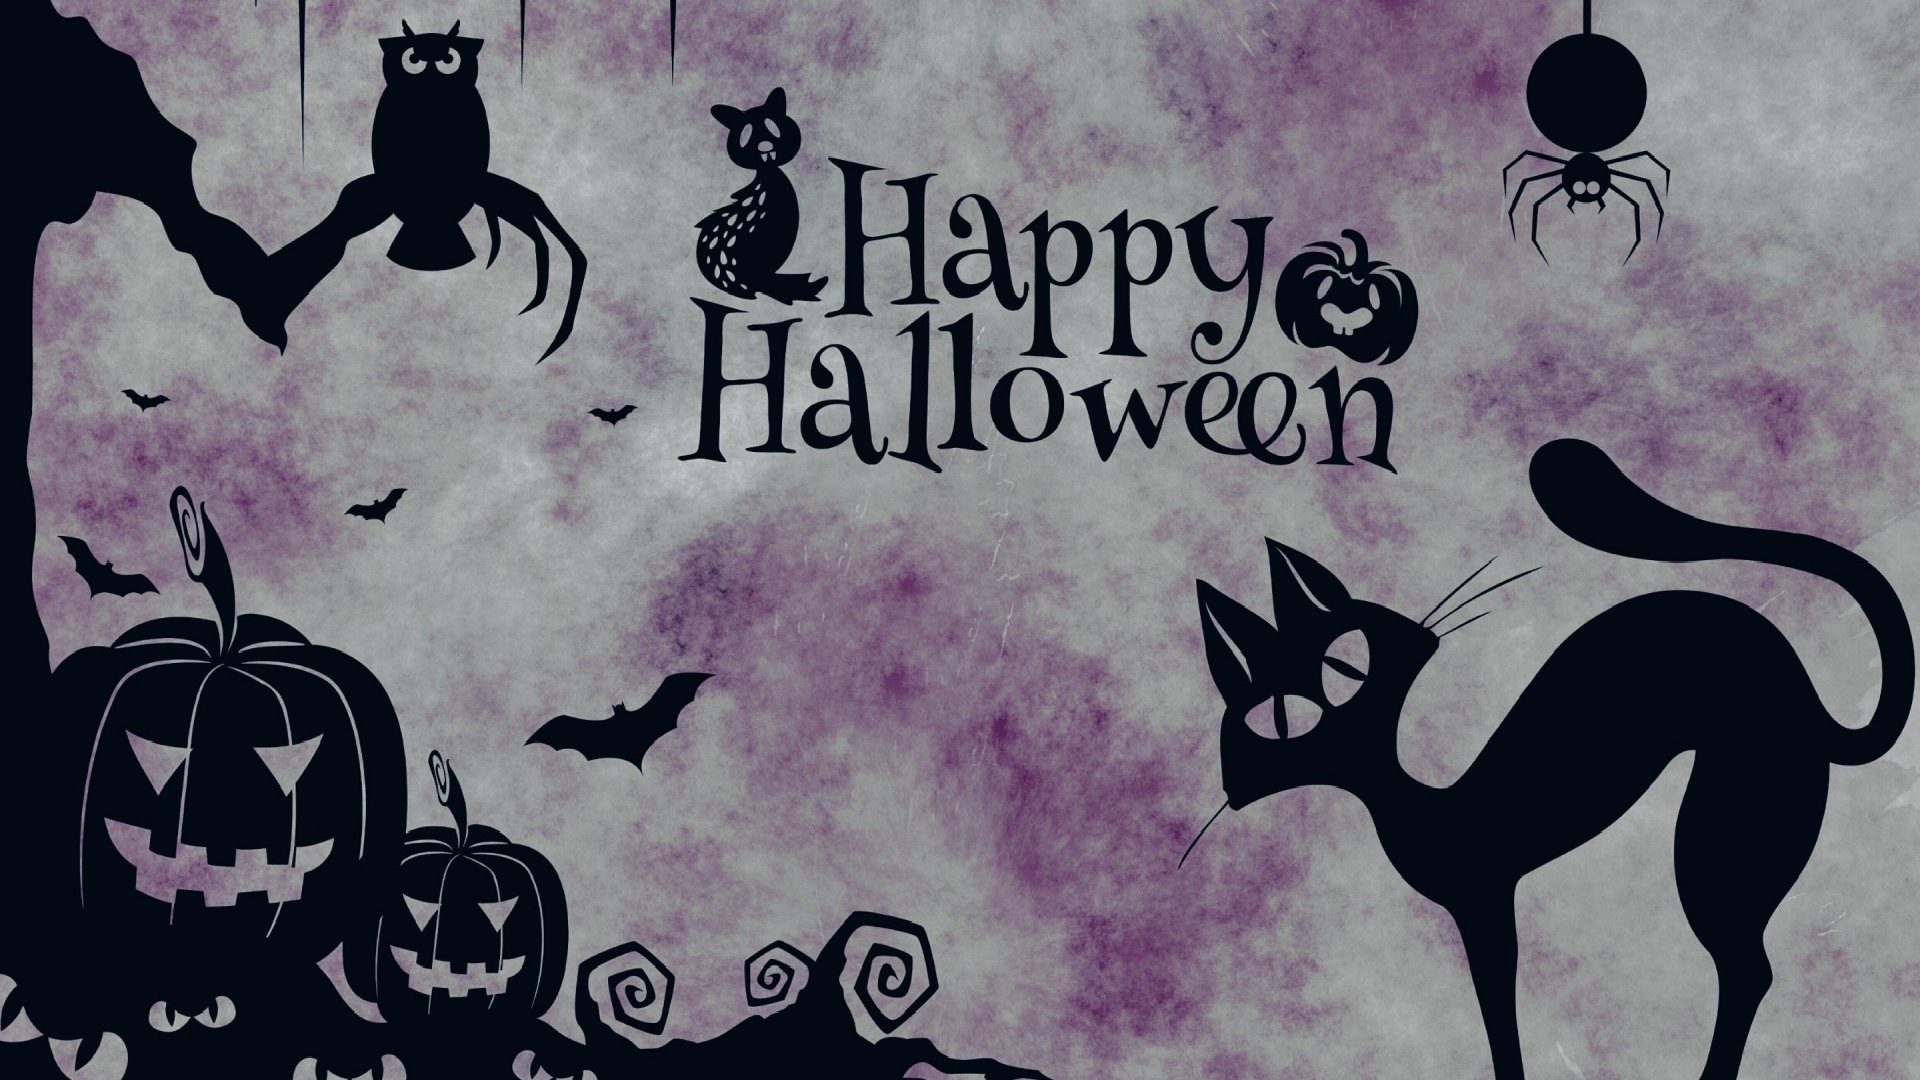 mewallpaper out New Wallpaper Today Halloween Background Free Download Image #screen background #desktop #vintage #background knowledge #wallpaper #free Download here!